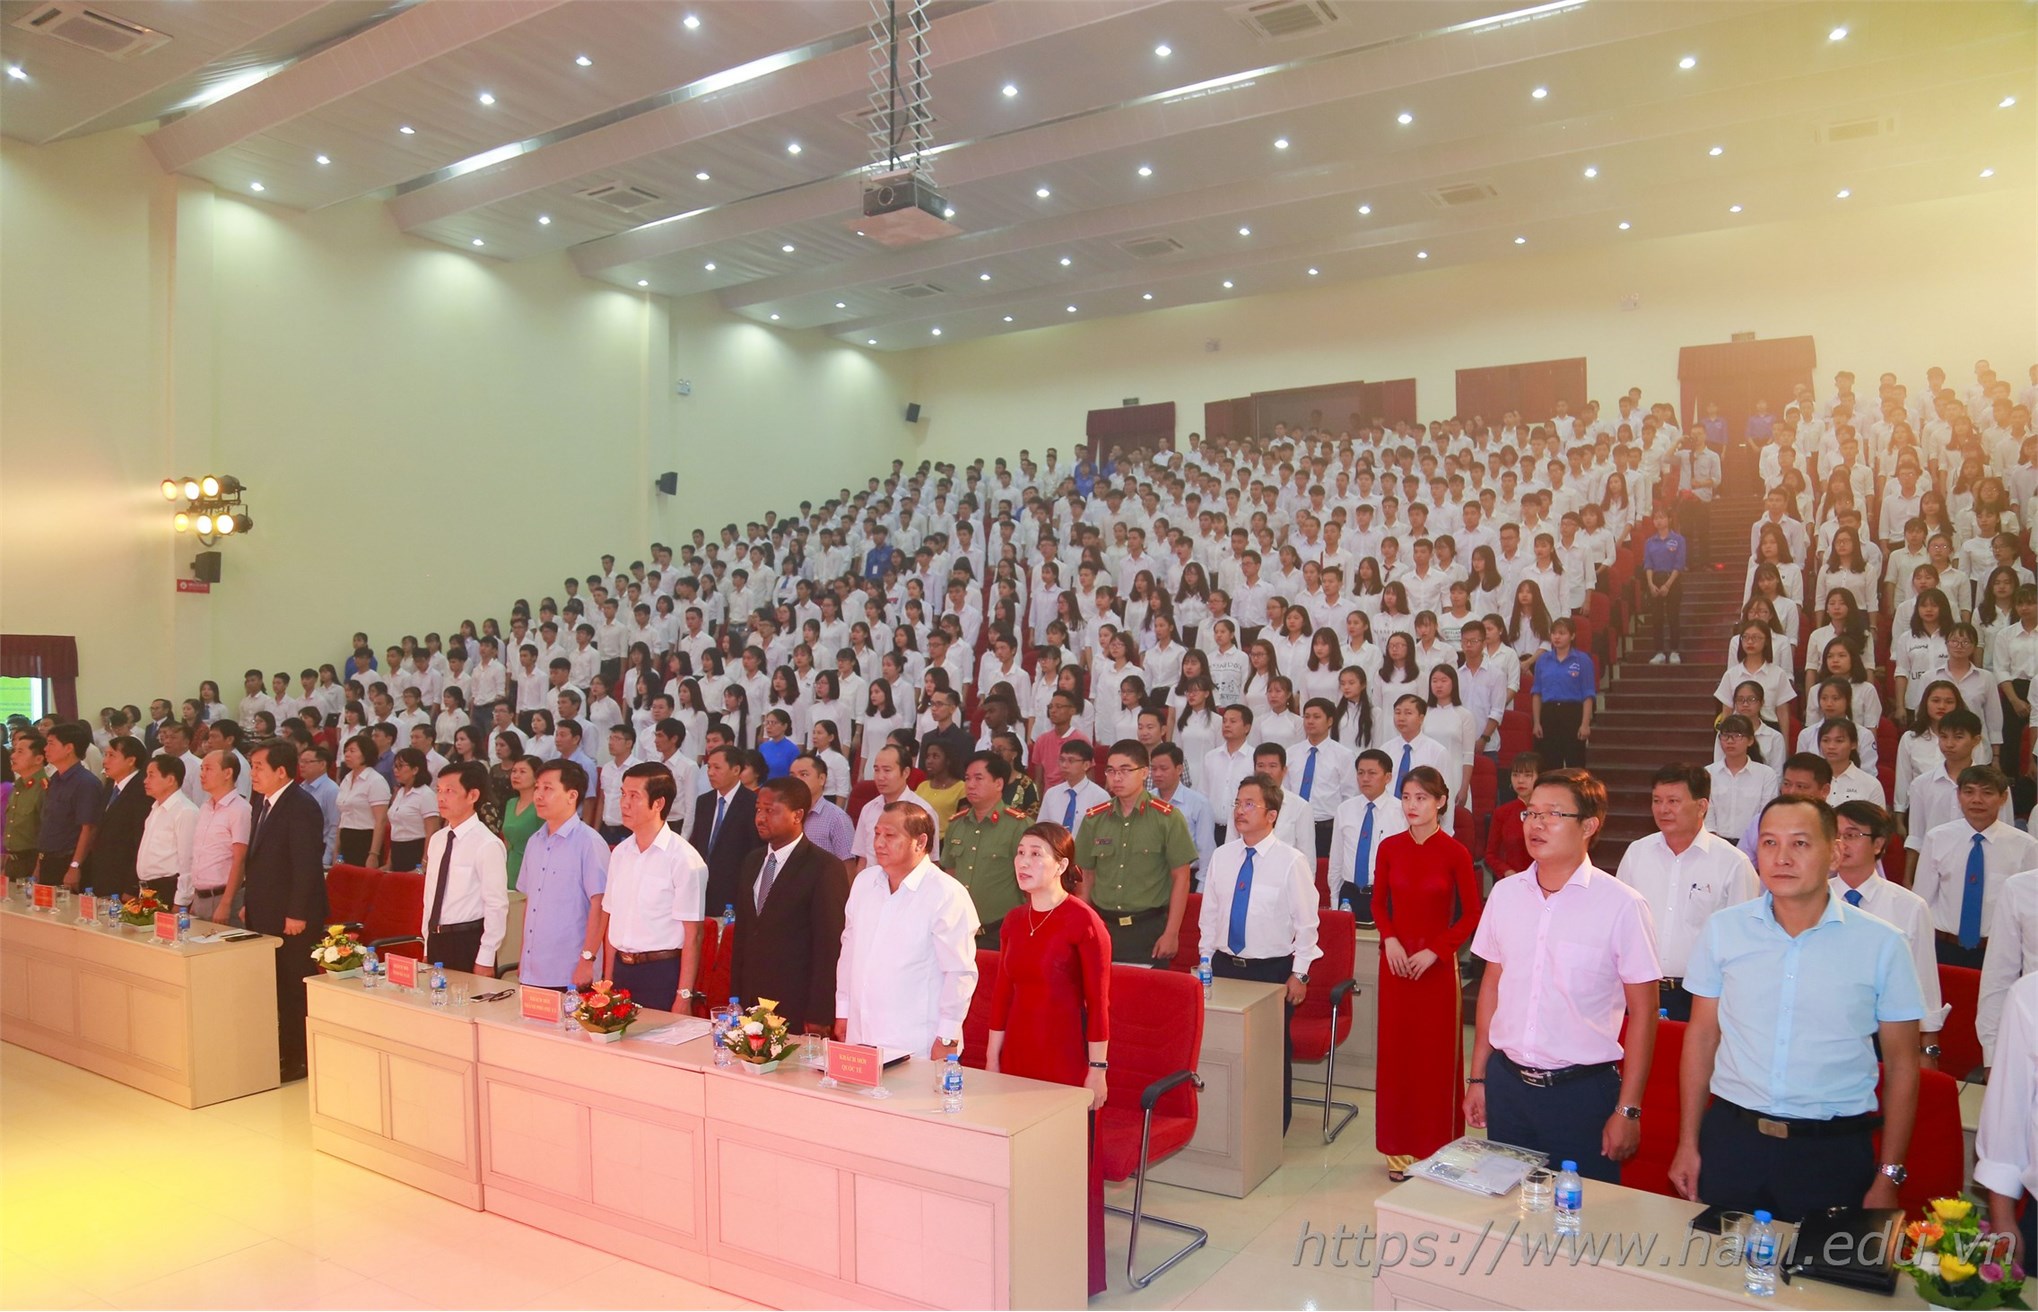 HaUI Opening ceremony of the new 2018 - 2019 academic year